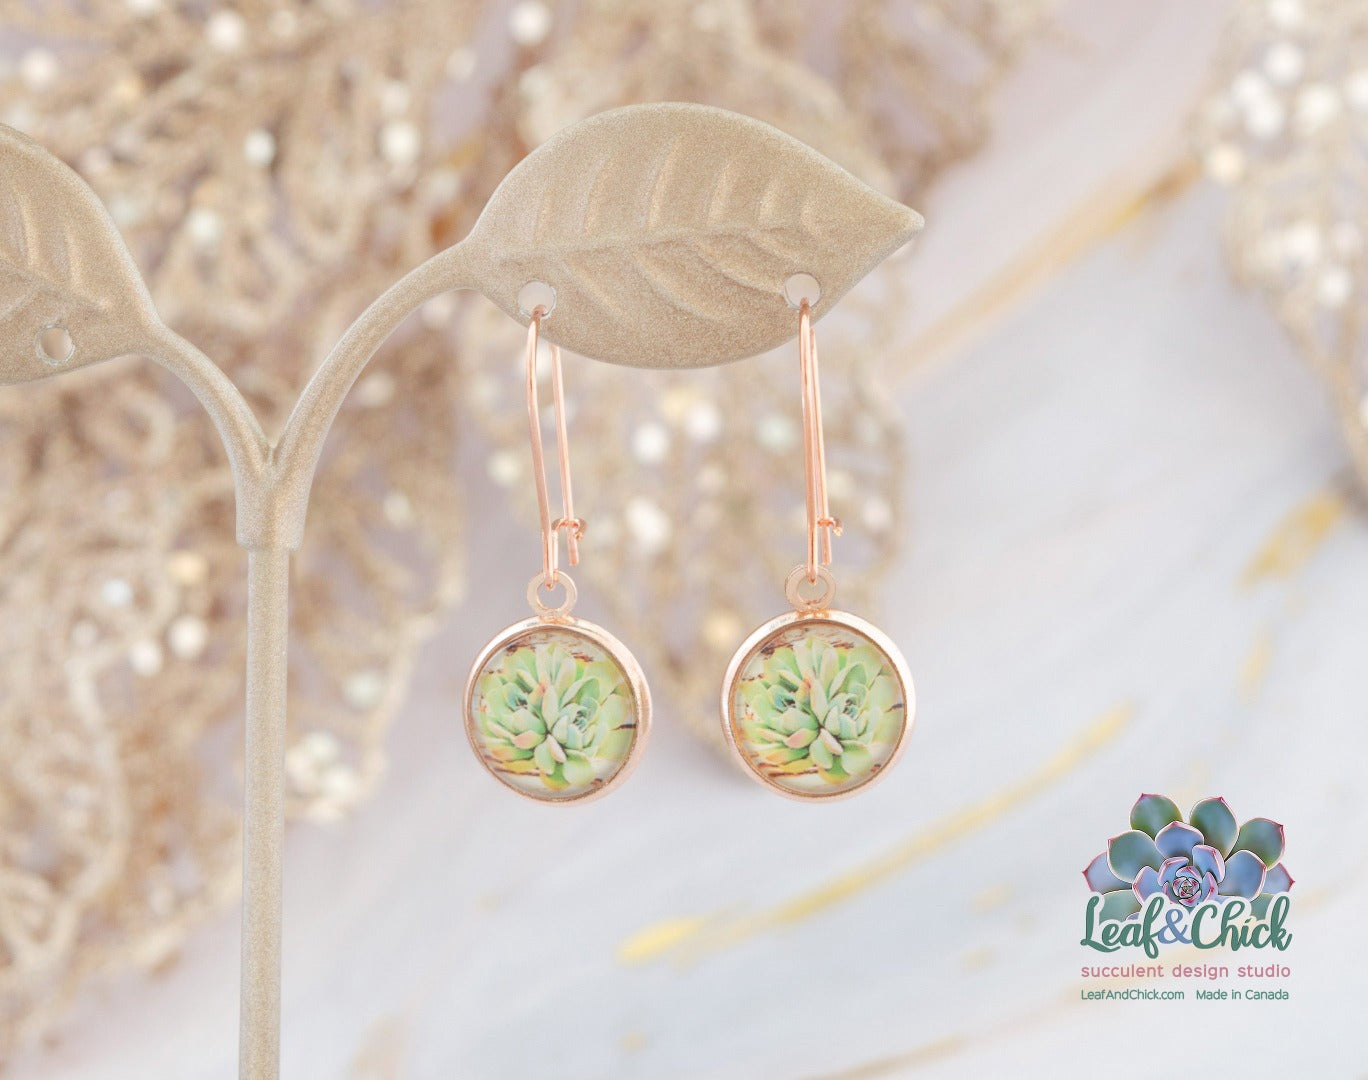 rose gold hoop earrings hanging with green succulent art